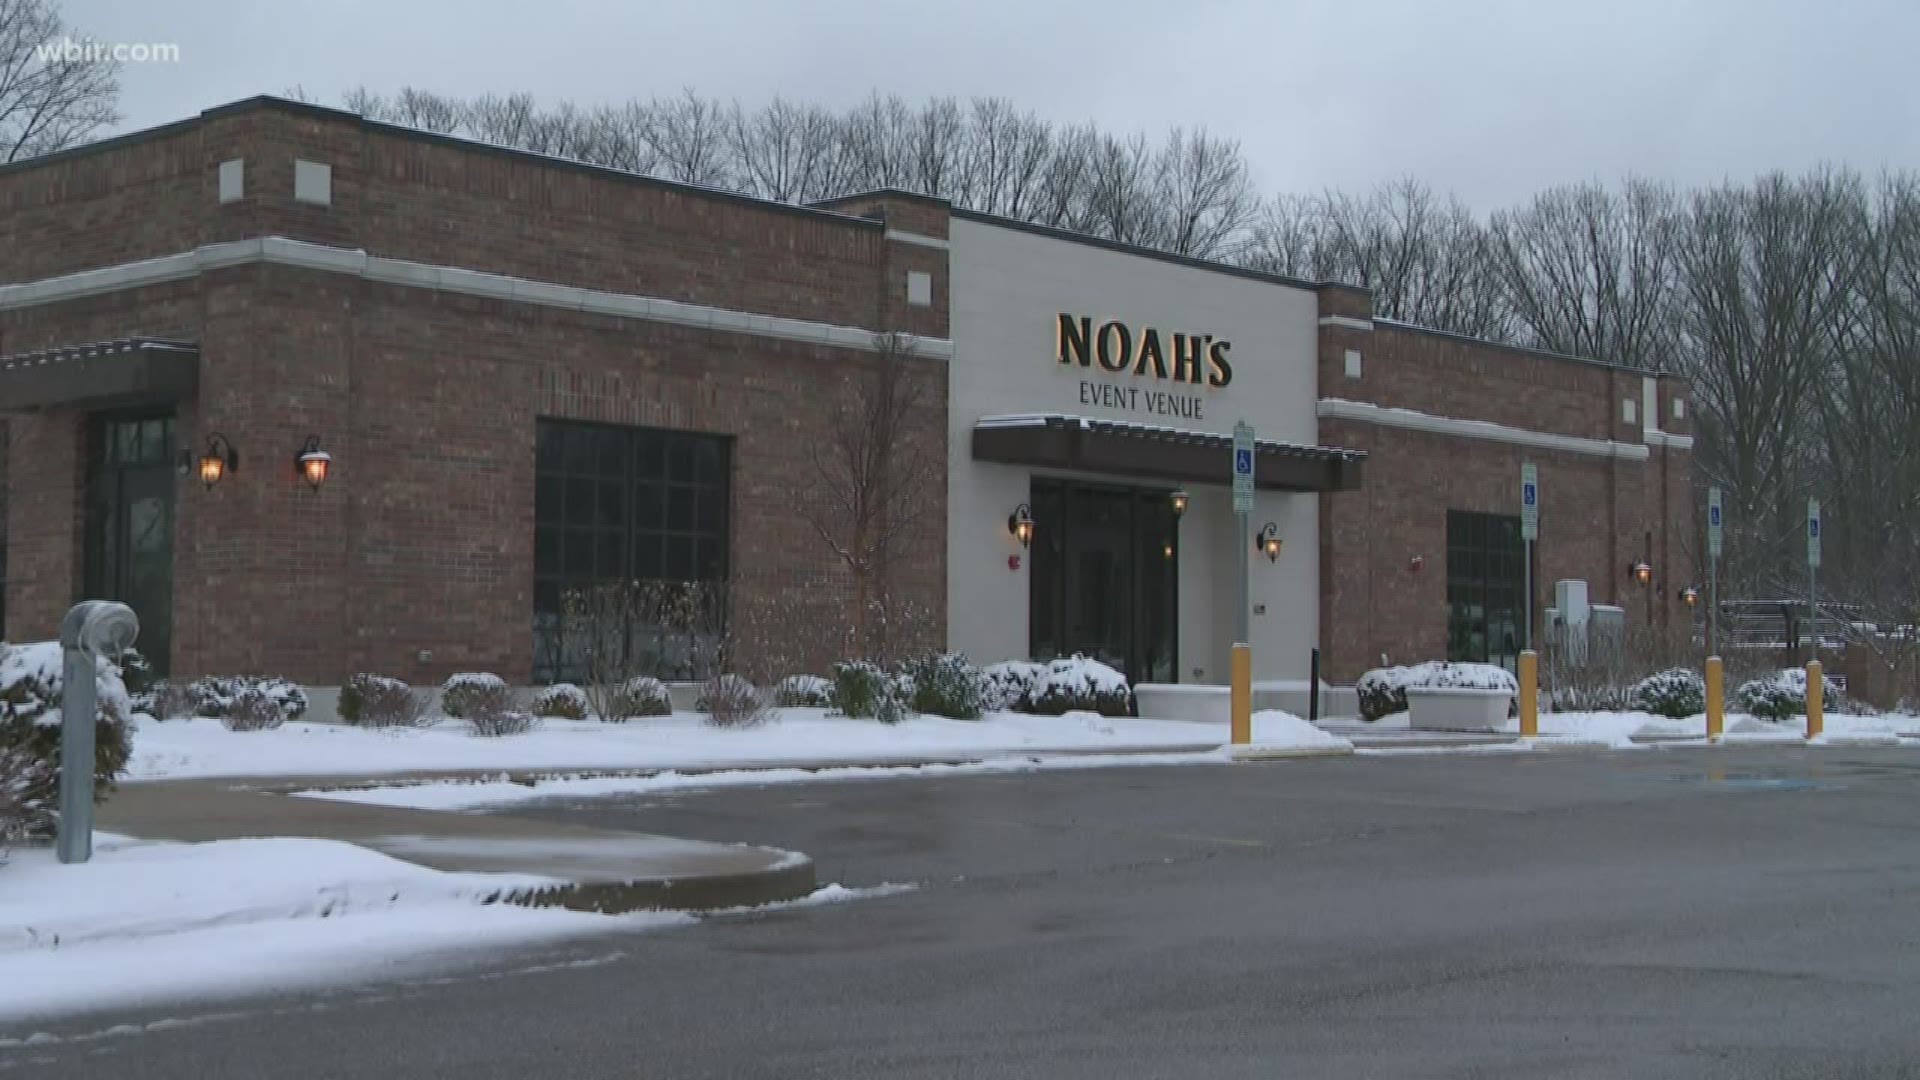 On Thursday, a federal bankruptcy judge ordered Noah's Event Venue to close its remaining reception halls, including one in Kingston.